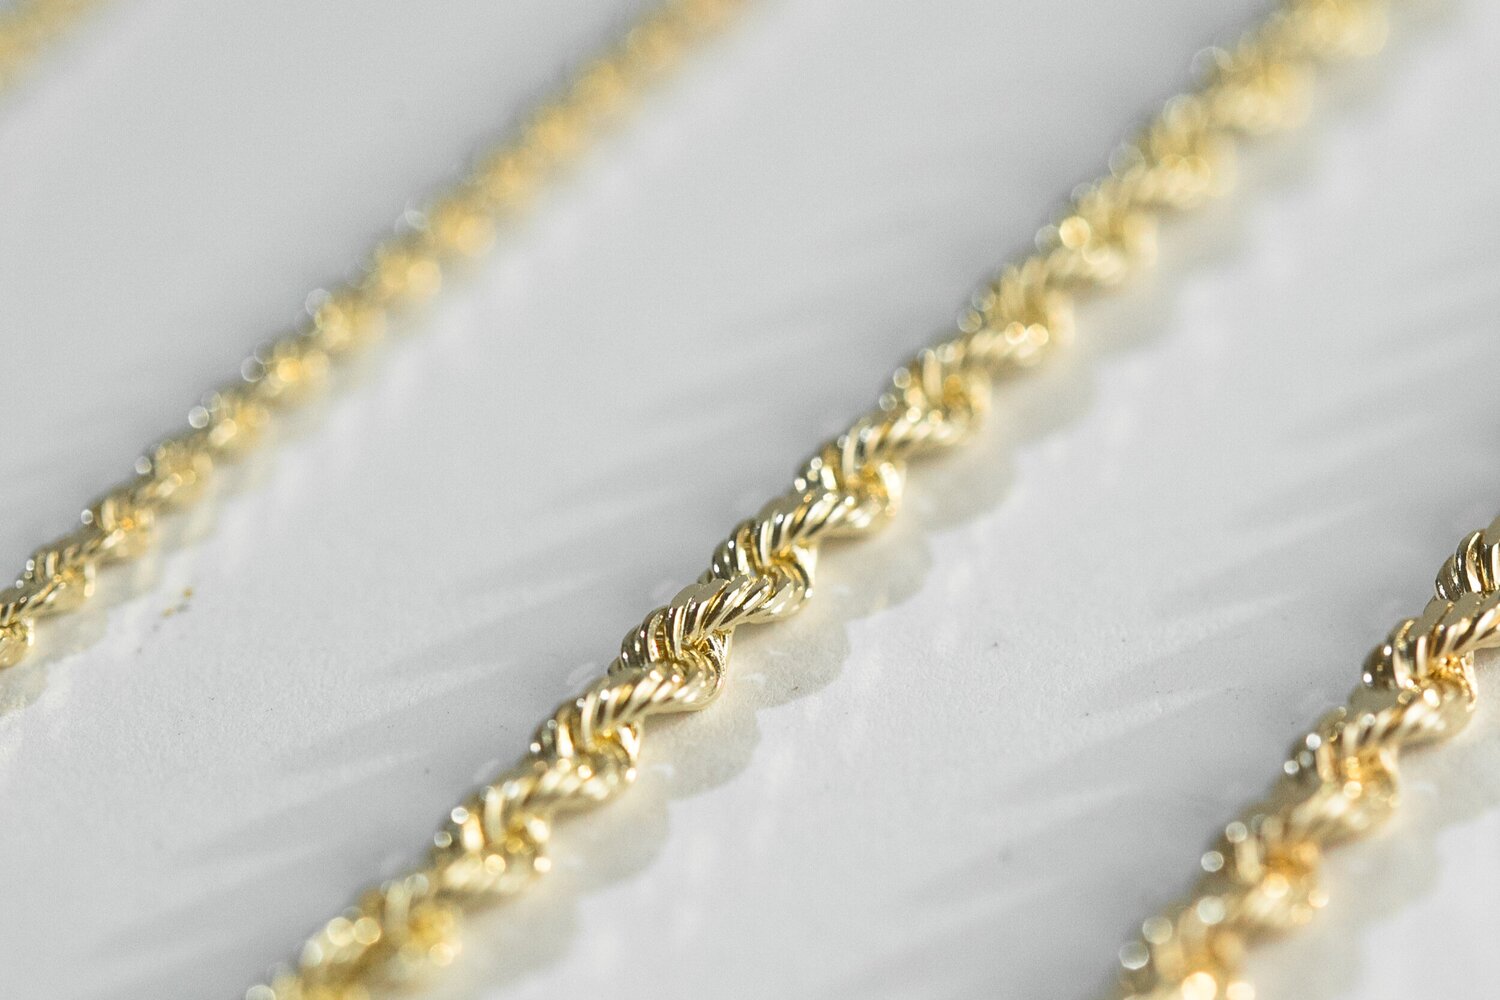 10mm 14K Gold Rope Chain - Jewelry & Accessories - Honolulu, Hawaii, Facebook Marketplace